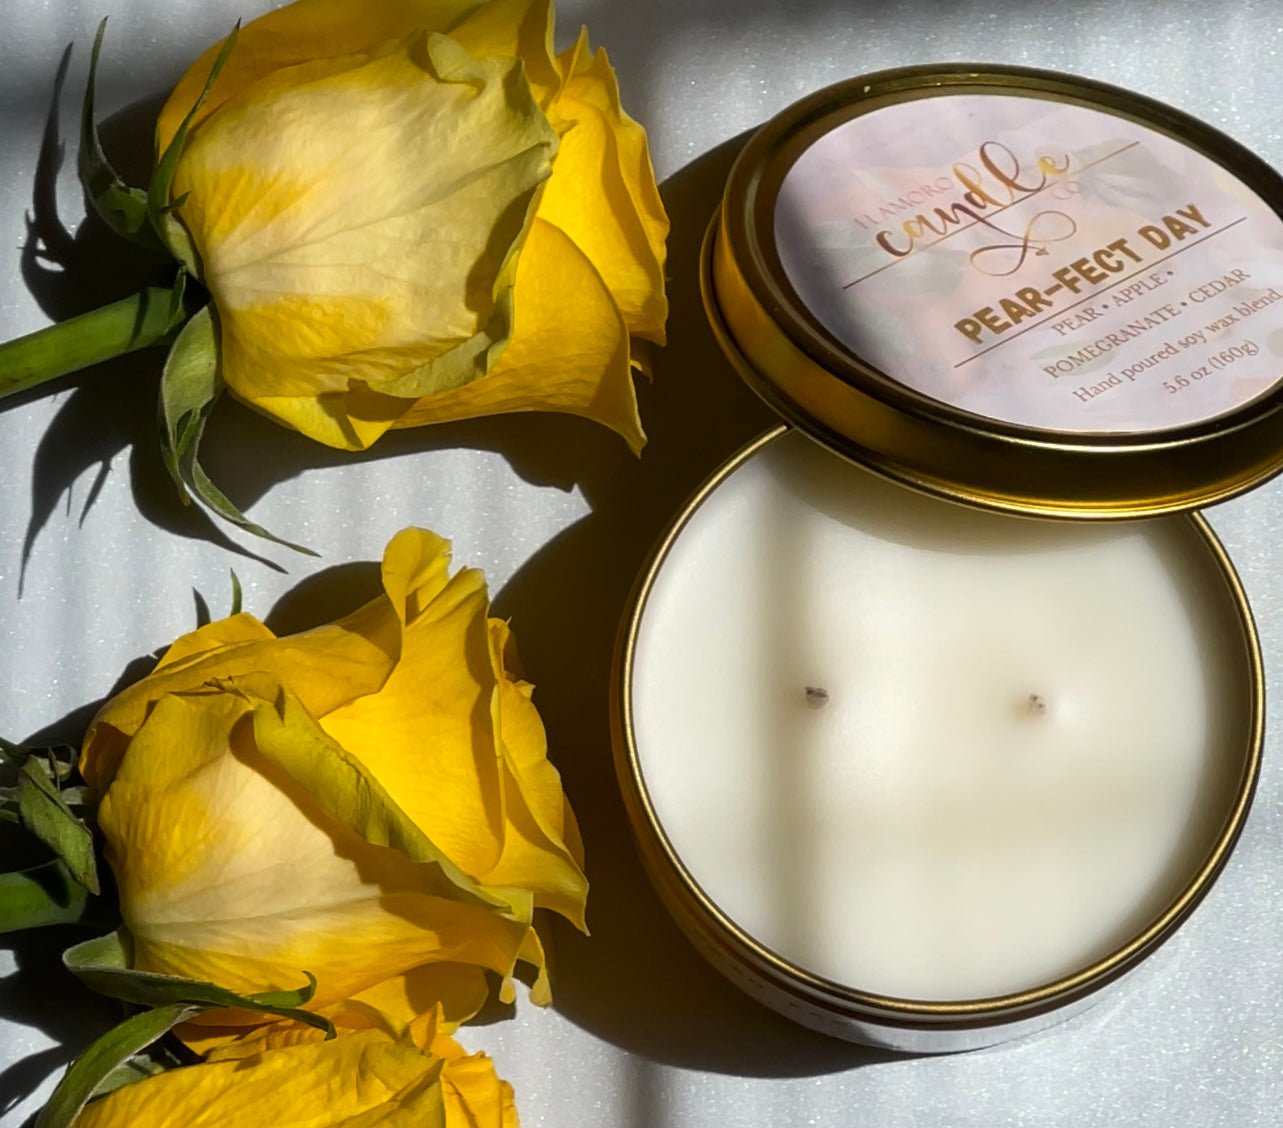 Pear-fect Day - Flamoro Candle Co.